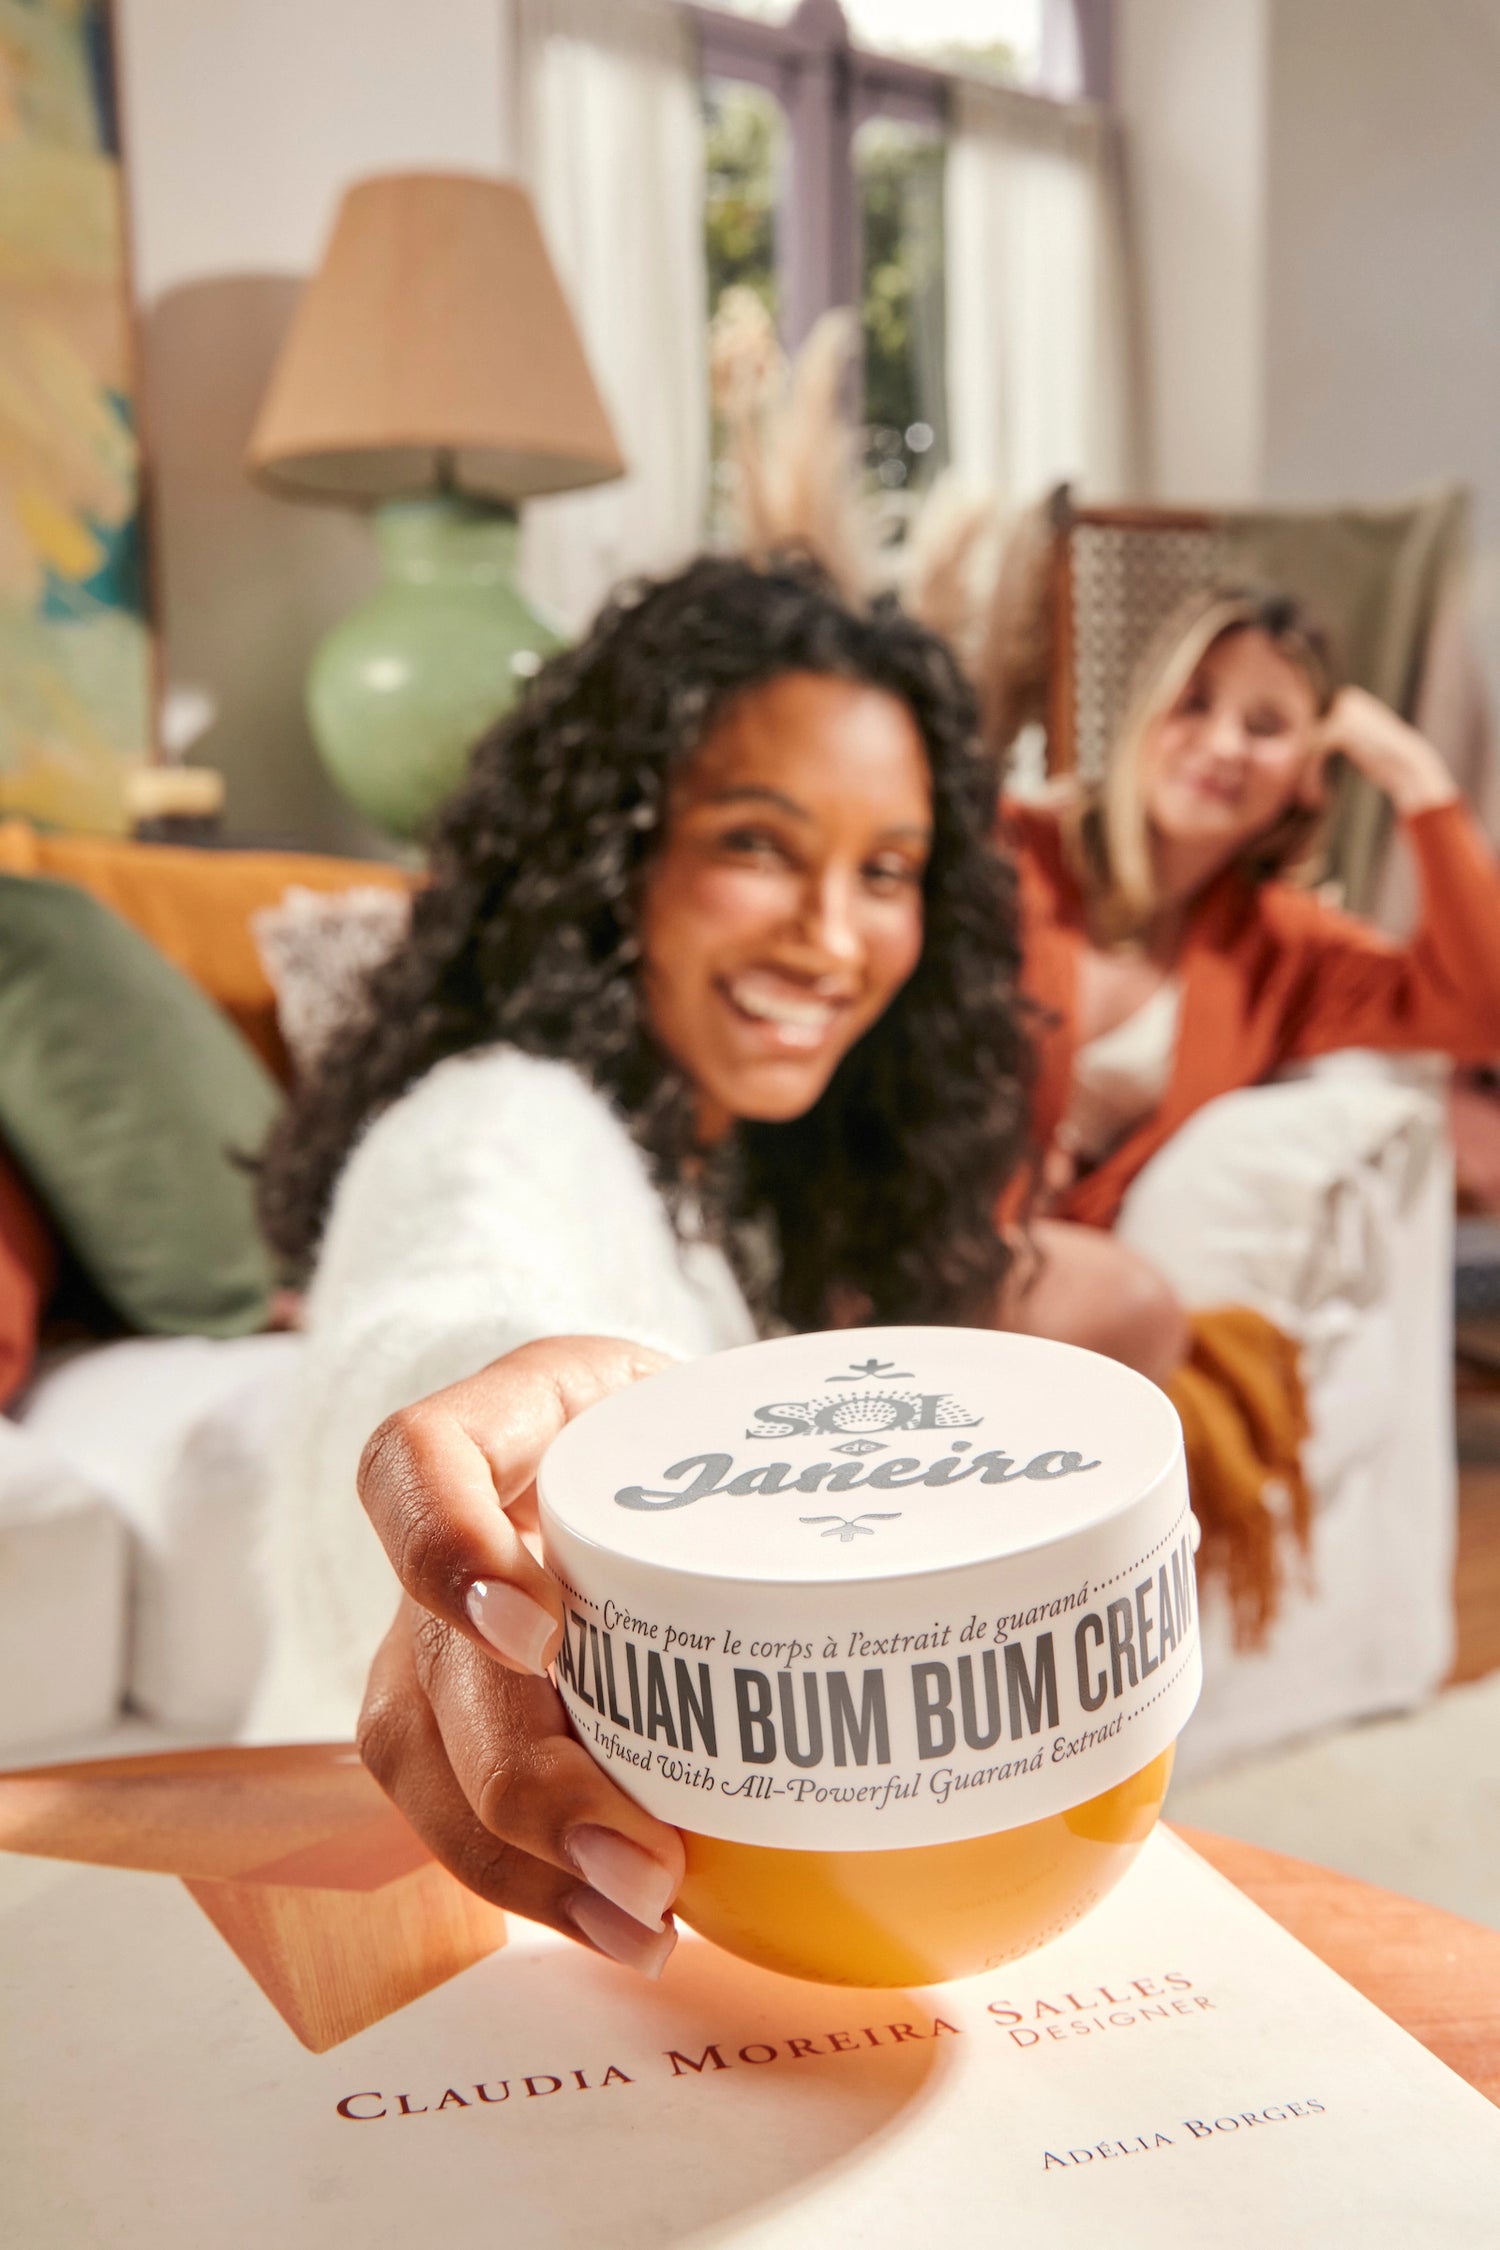 two women sitting on a couch. One one is reaching for a jar of Brazilian Bum Bum Cream